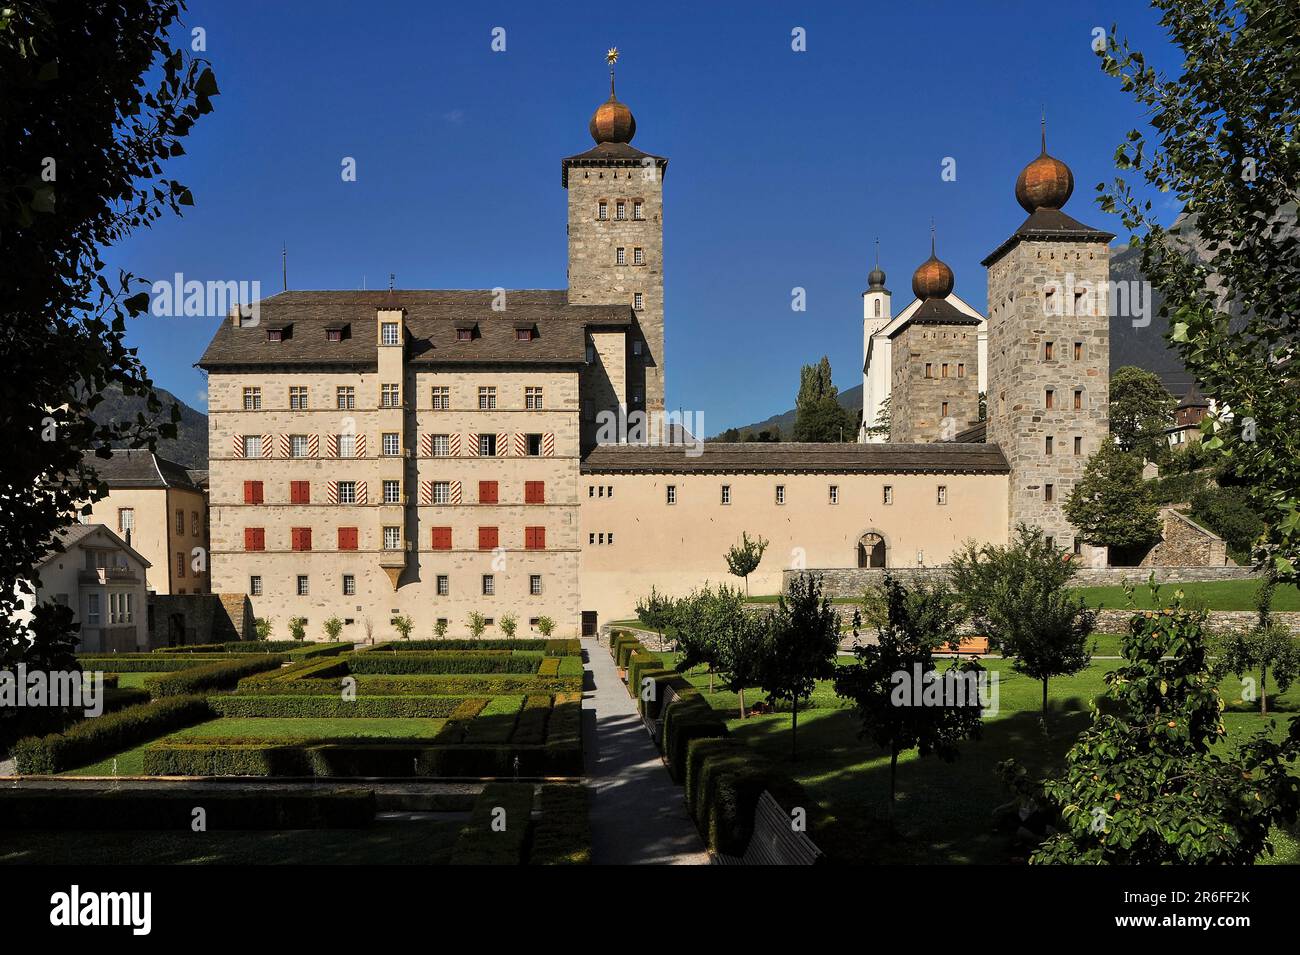 The Baroque Stockalper Palace or Stockalperpalast, its three square towers each topped by a gilded onion dome, at Brig in Valais Canton, Switzerland.  Built in the 1600s by fabulously wealthy entrepreneur, Kaspar Stockalper, the palace was the largest secular building in Switzerland at the time of its construction. Stock Photo